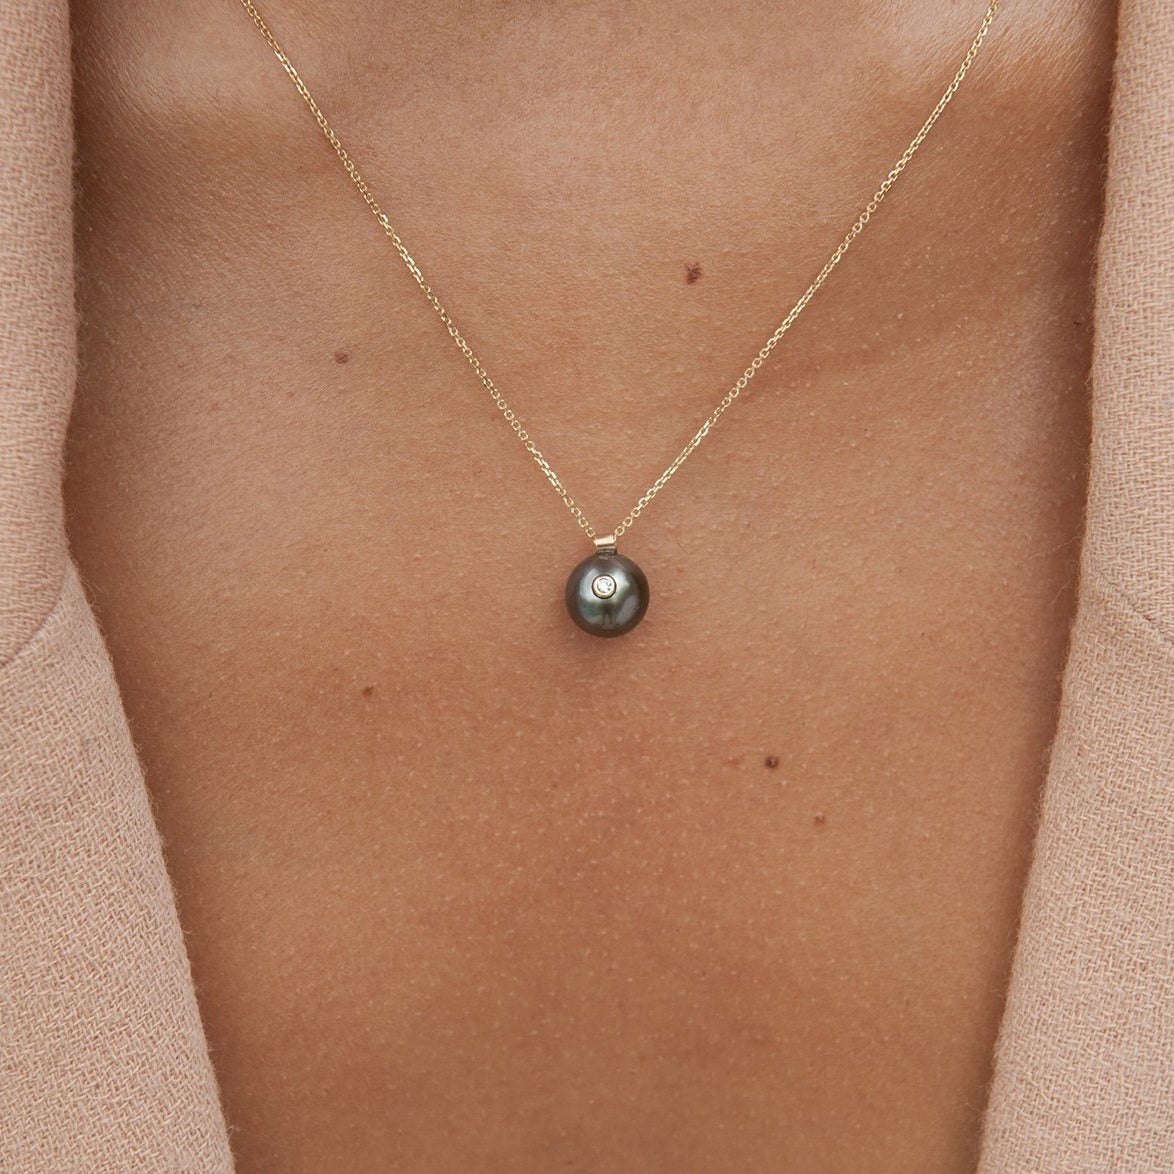 Everly Necklace, Tahitian Black Pearl